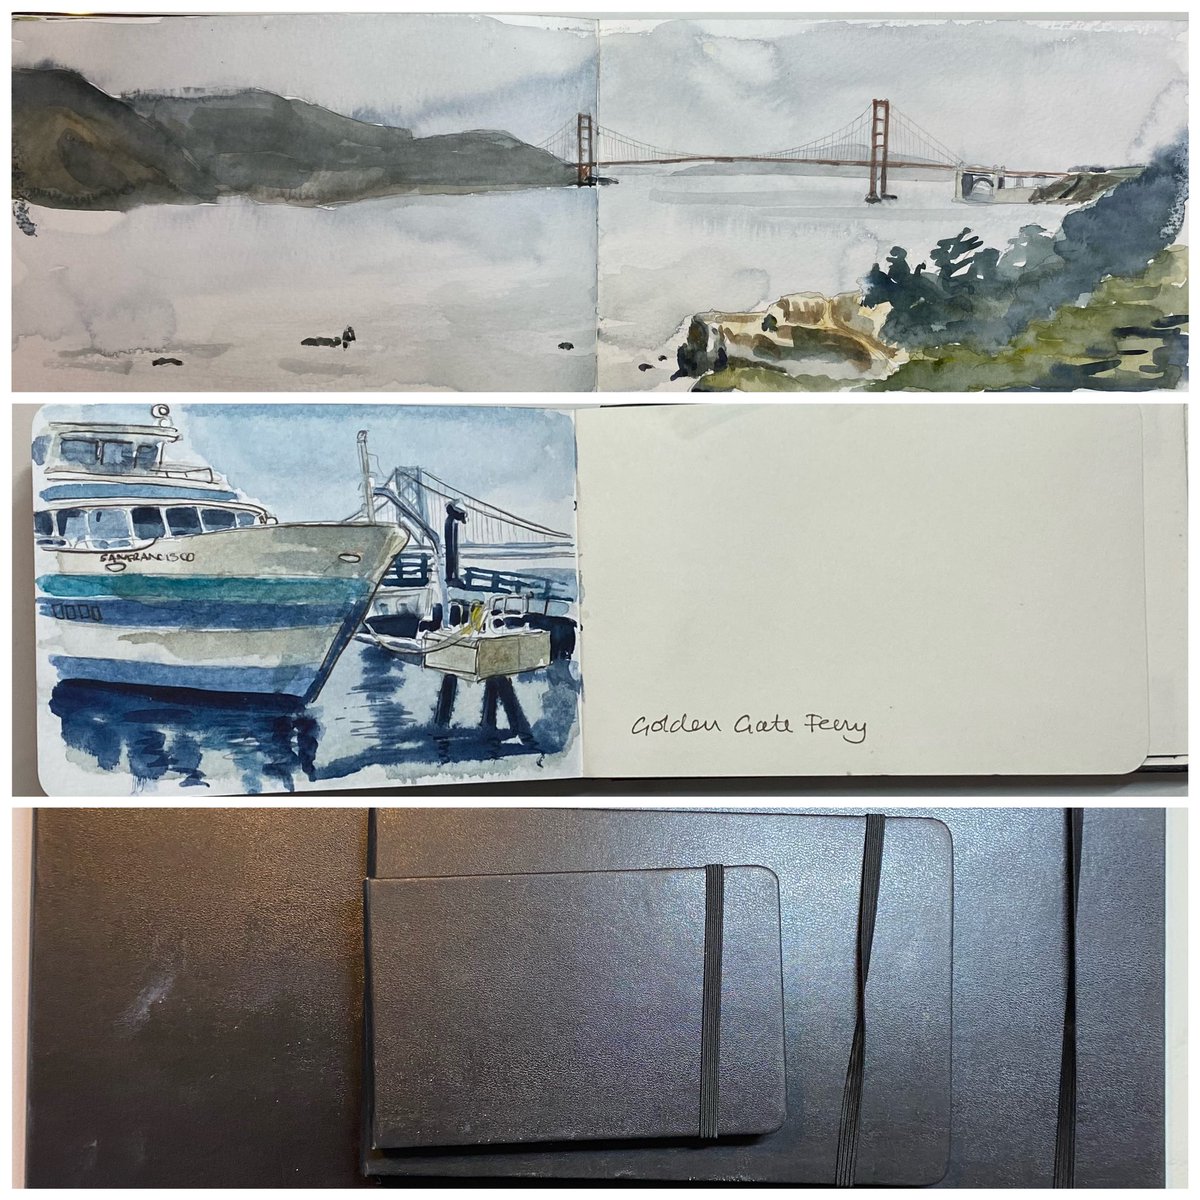 I have just come back from a wonderfully hectic trip to California. I managed to squeeze in a few sketches which are here. #California #yosemite #sketchbook #drawing